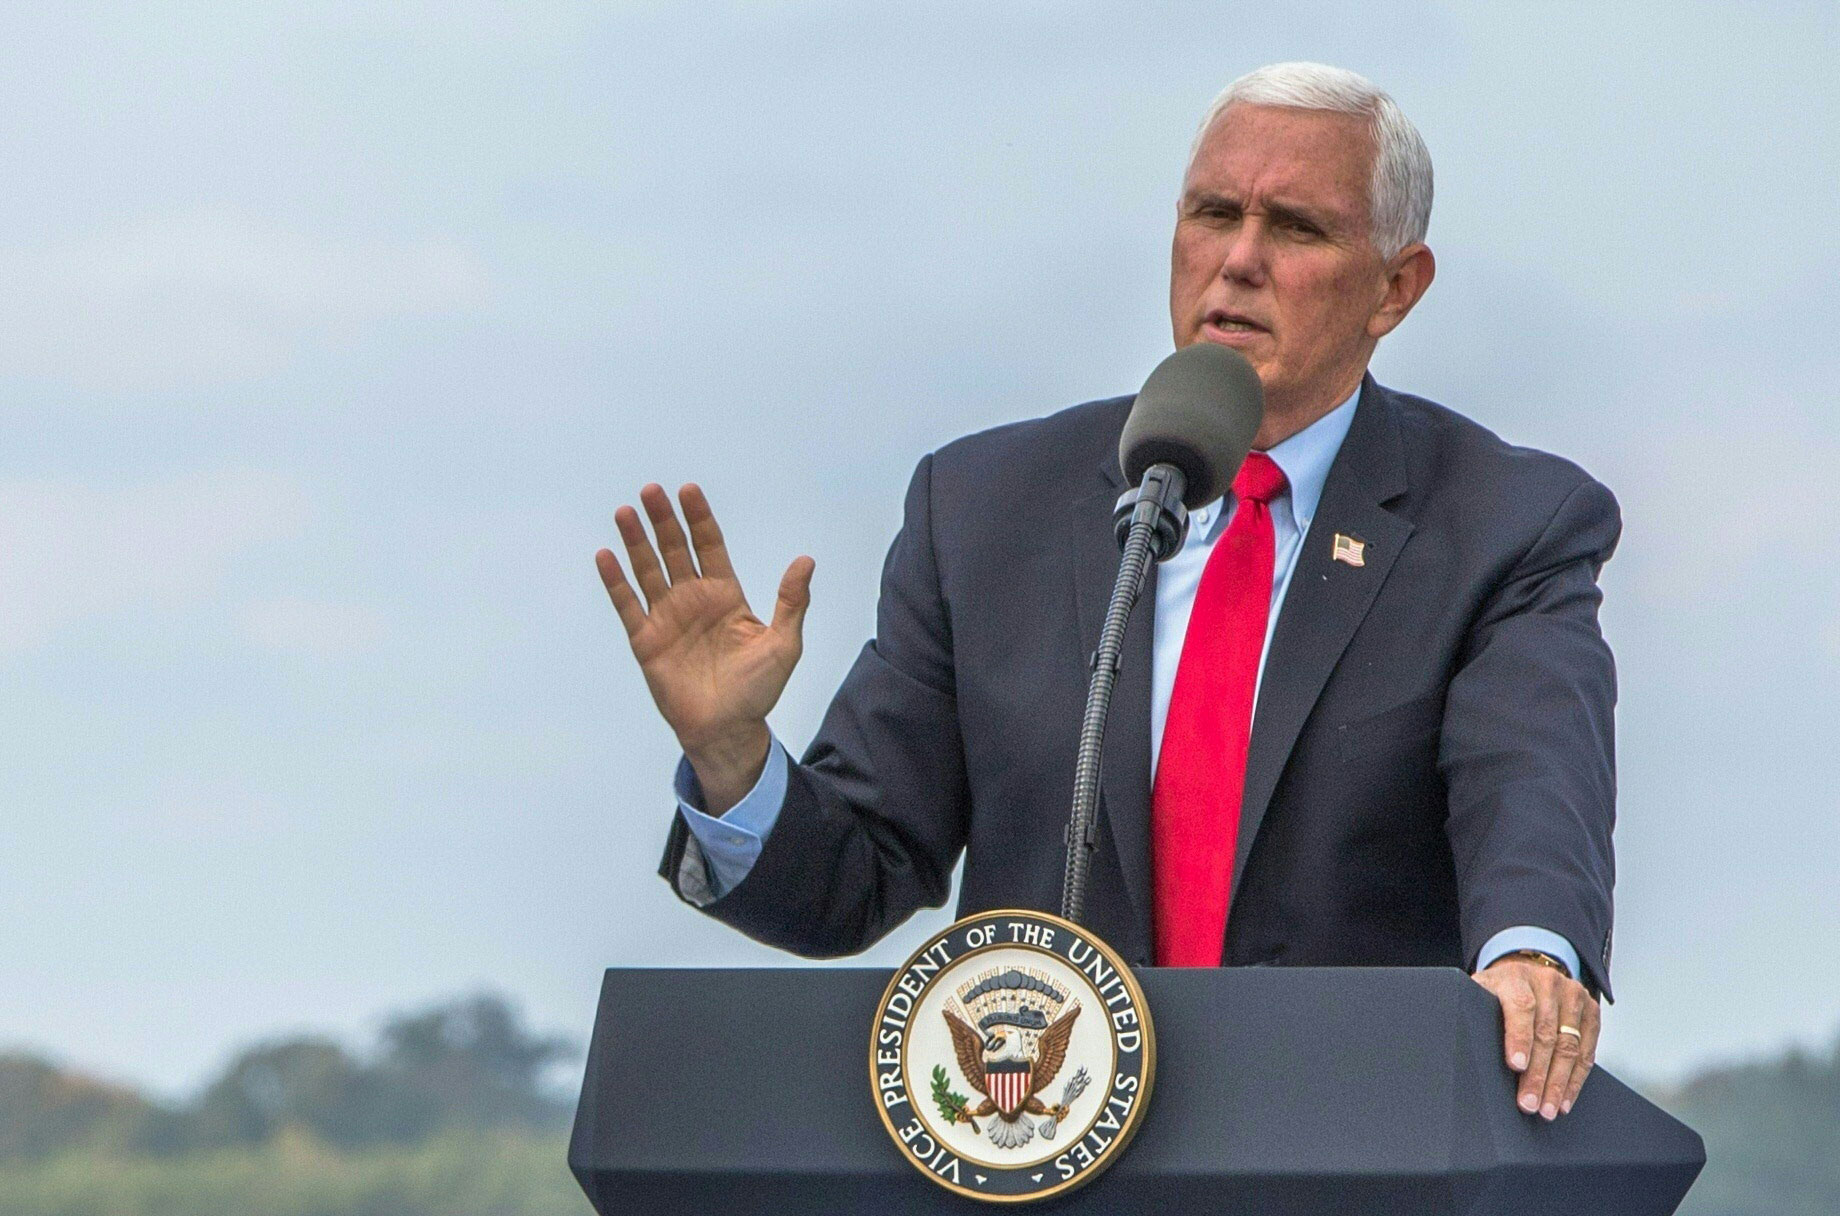 Vice President Mike Pence speaks at a rally in Greensboro, North Carolina, on October 27.